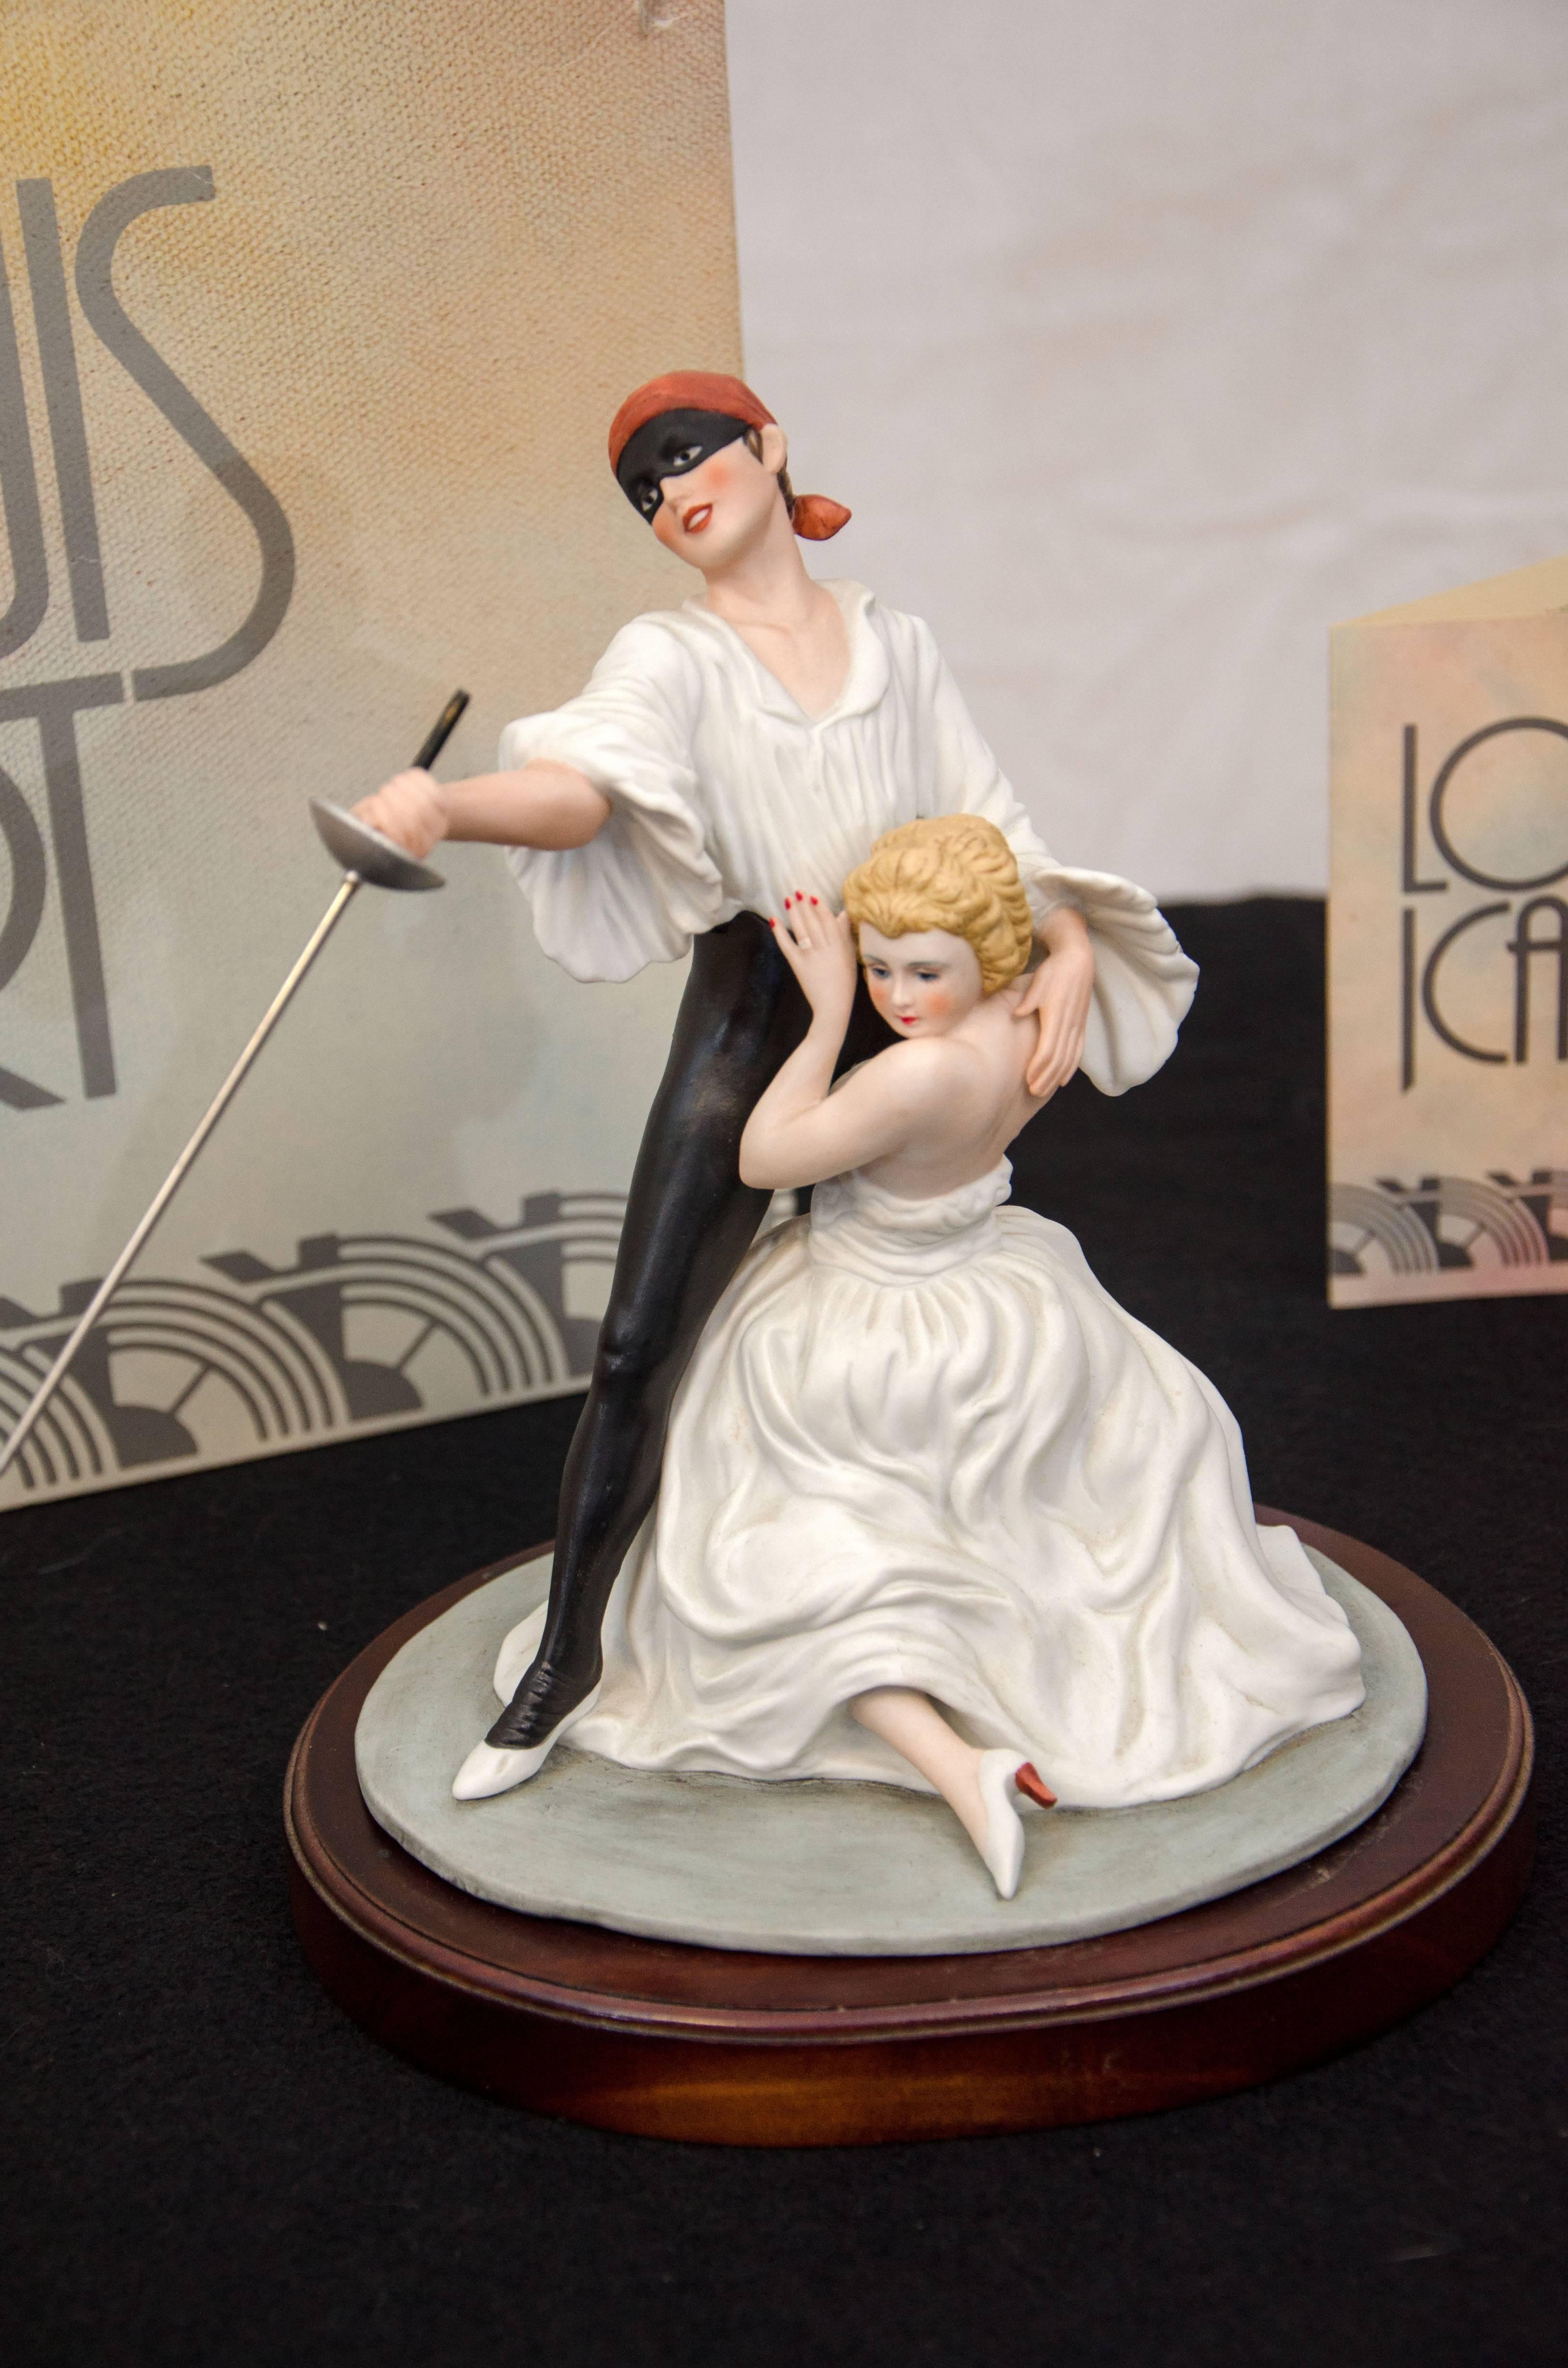 These porcelain figurines were based on Louis Icarts original dry point etchings that were his artwork from the 1920s and 1930s. These collectible figurines were done in the 1980's and include the original box and packaging as well as certificates